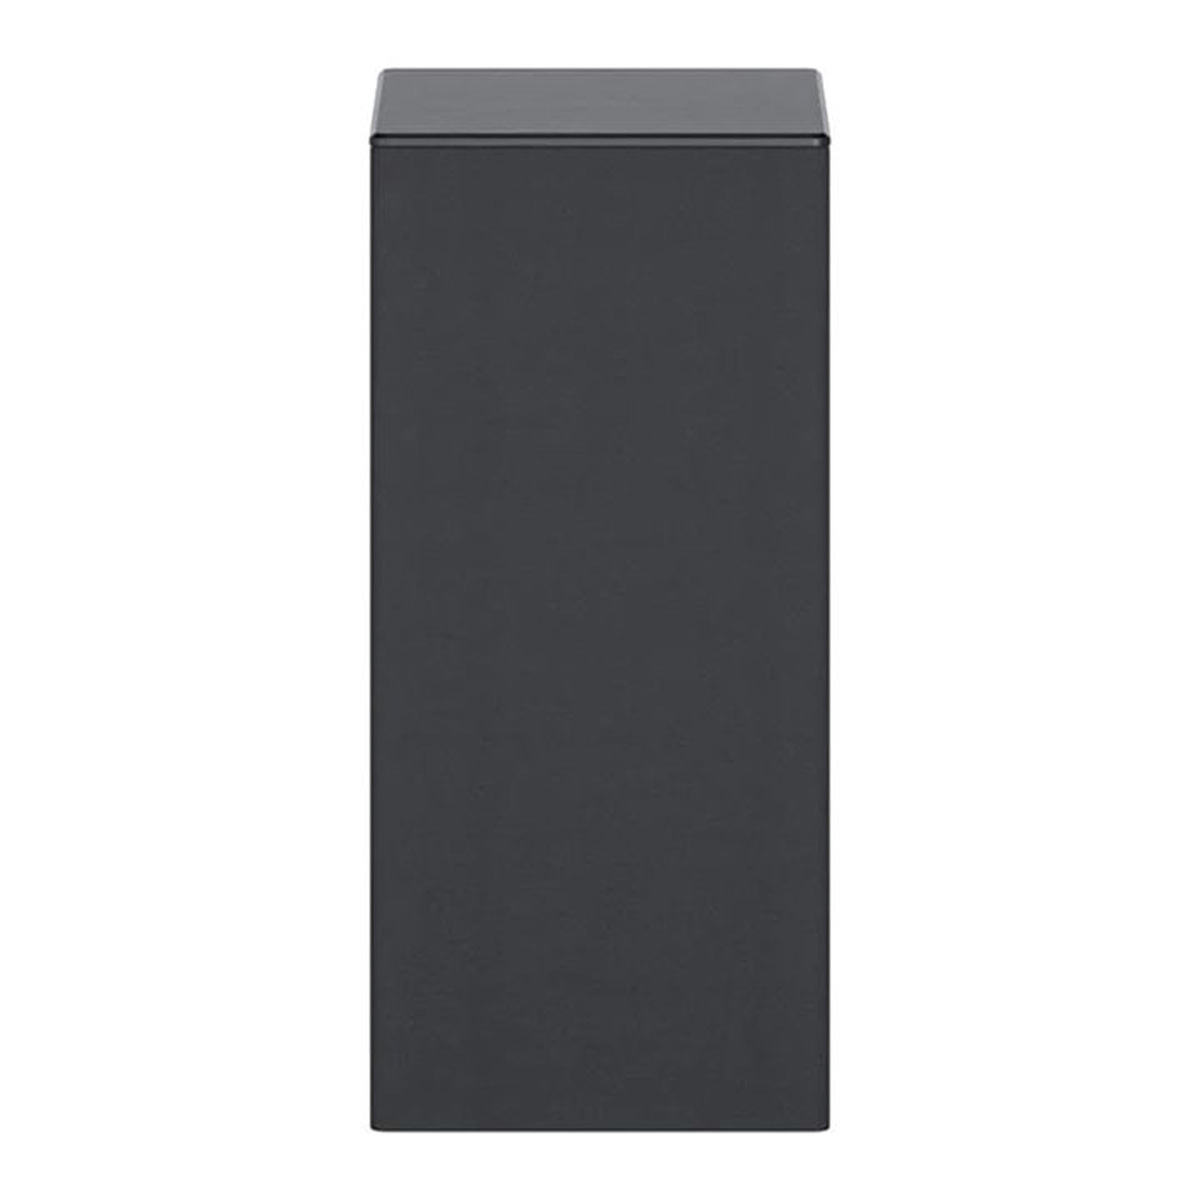 LG 5.1.2 ch Sound Bar with Dolby Atmos and Surround Speakers, 520 W, Black, S75QR